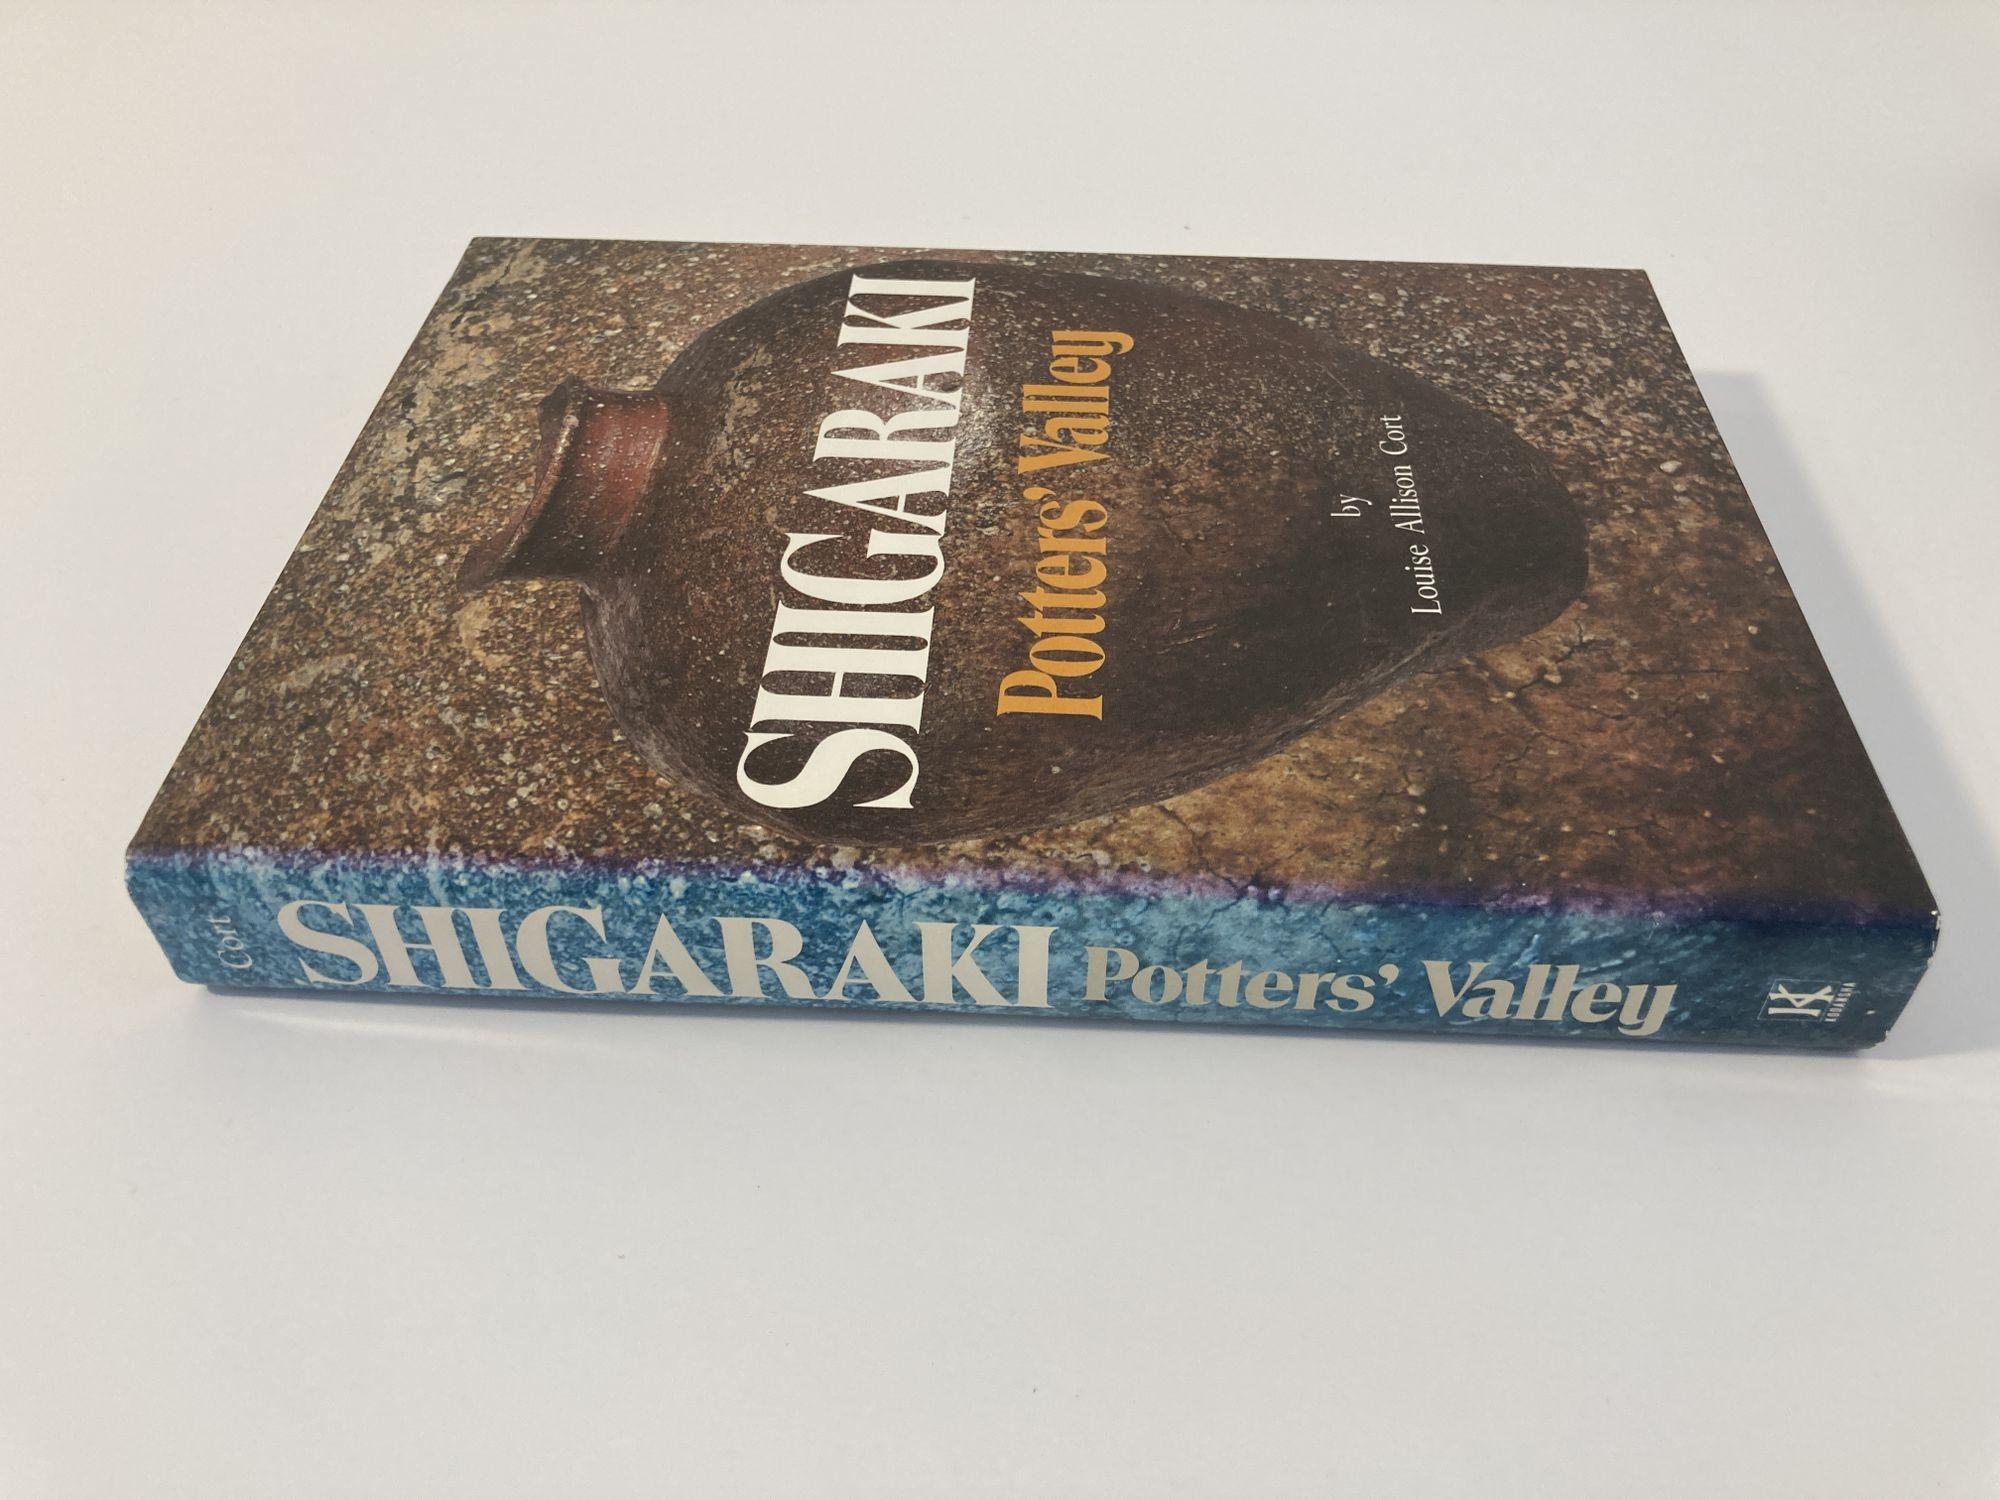 Shigaraki the Potters' Valley 1st Edition 1979 Japan Hardcover Book by Louise Al For Sale 1